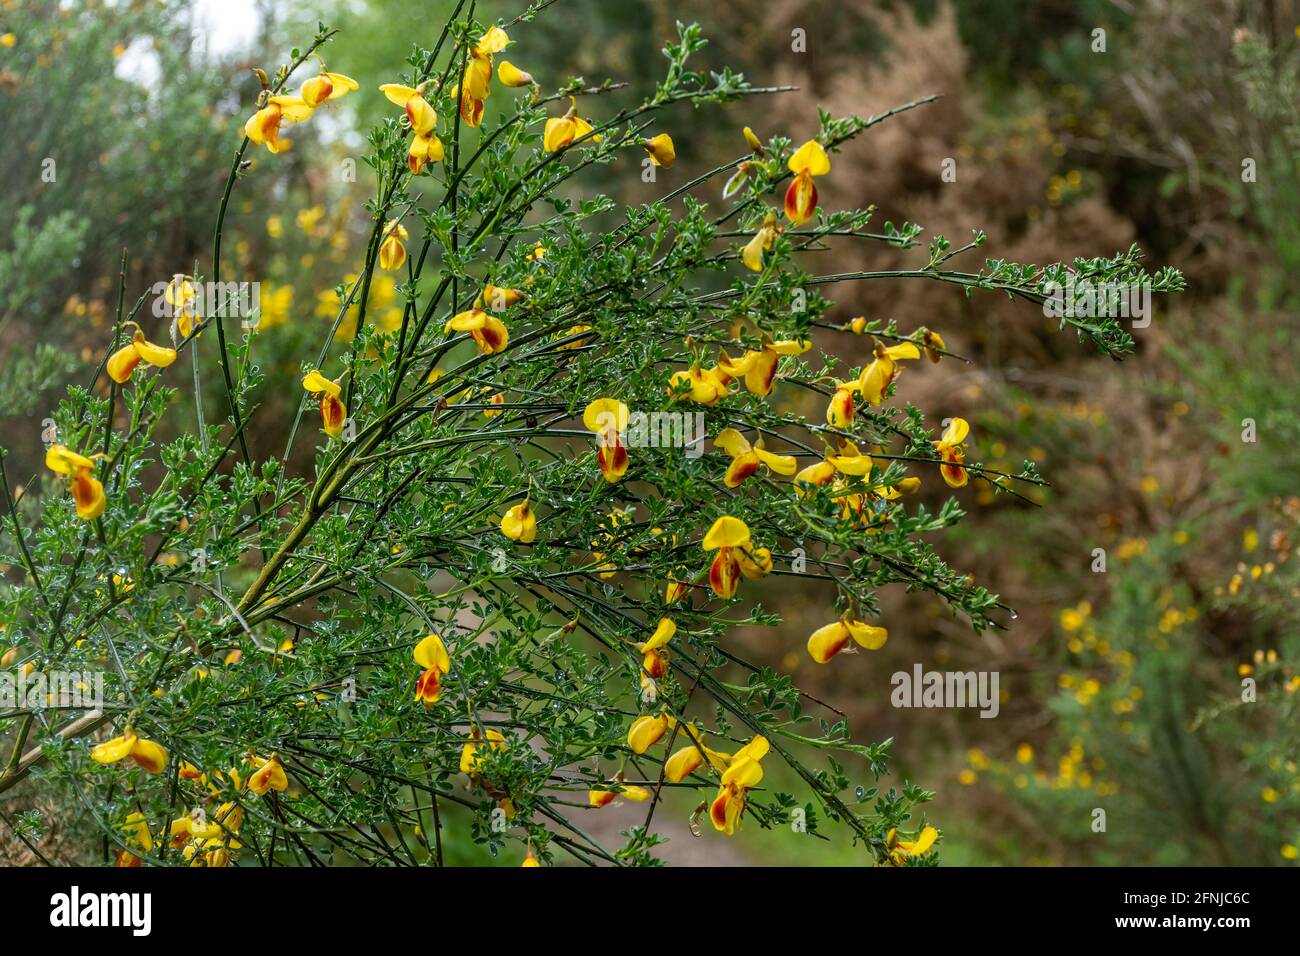 Common broom shrub (Cytisus scoparius) with colourful yellow and red flowers in May or Spring, UK Stock Photo